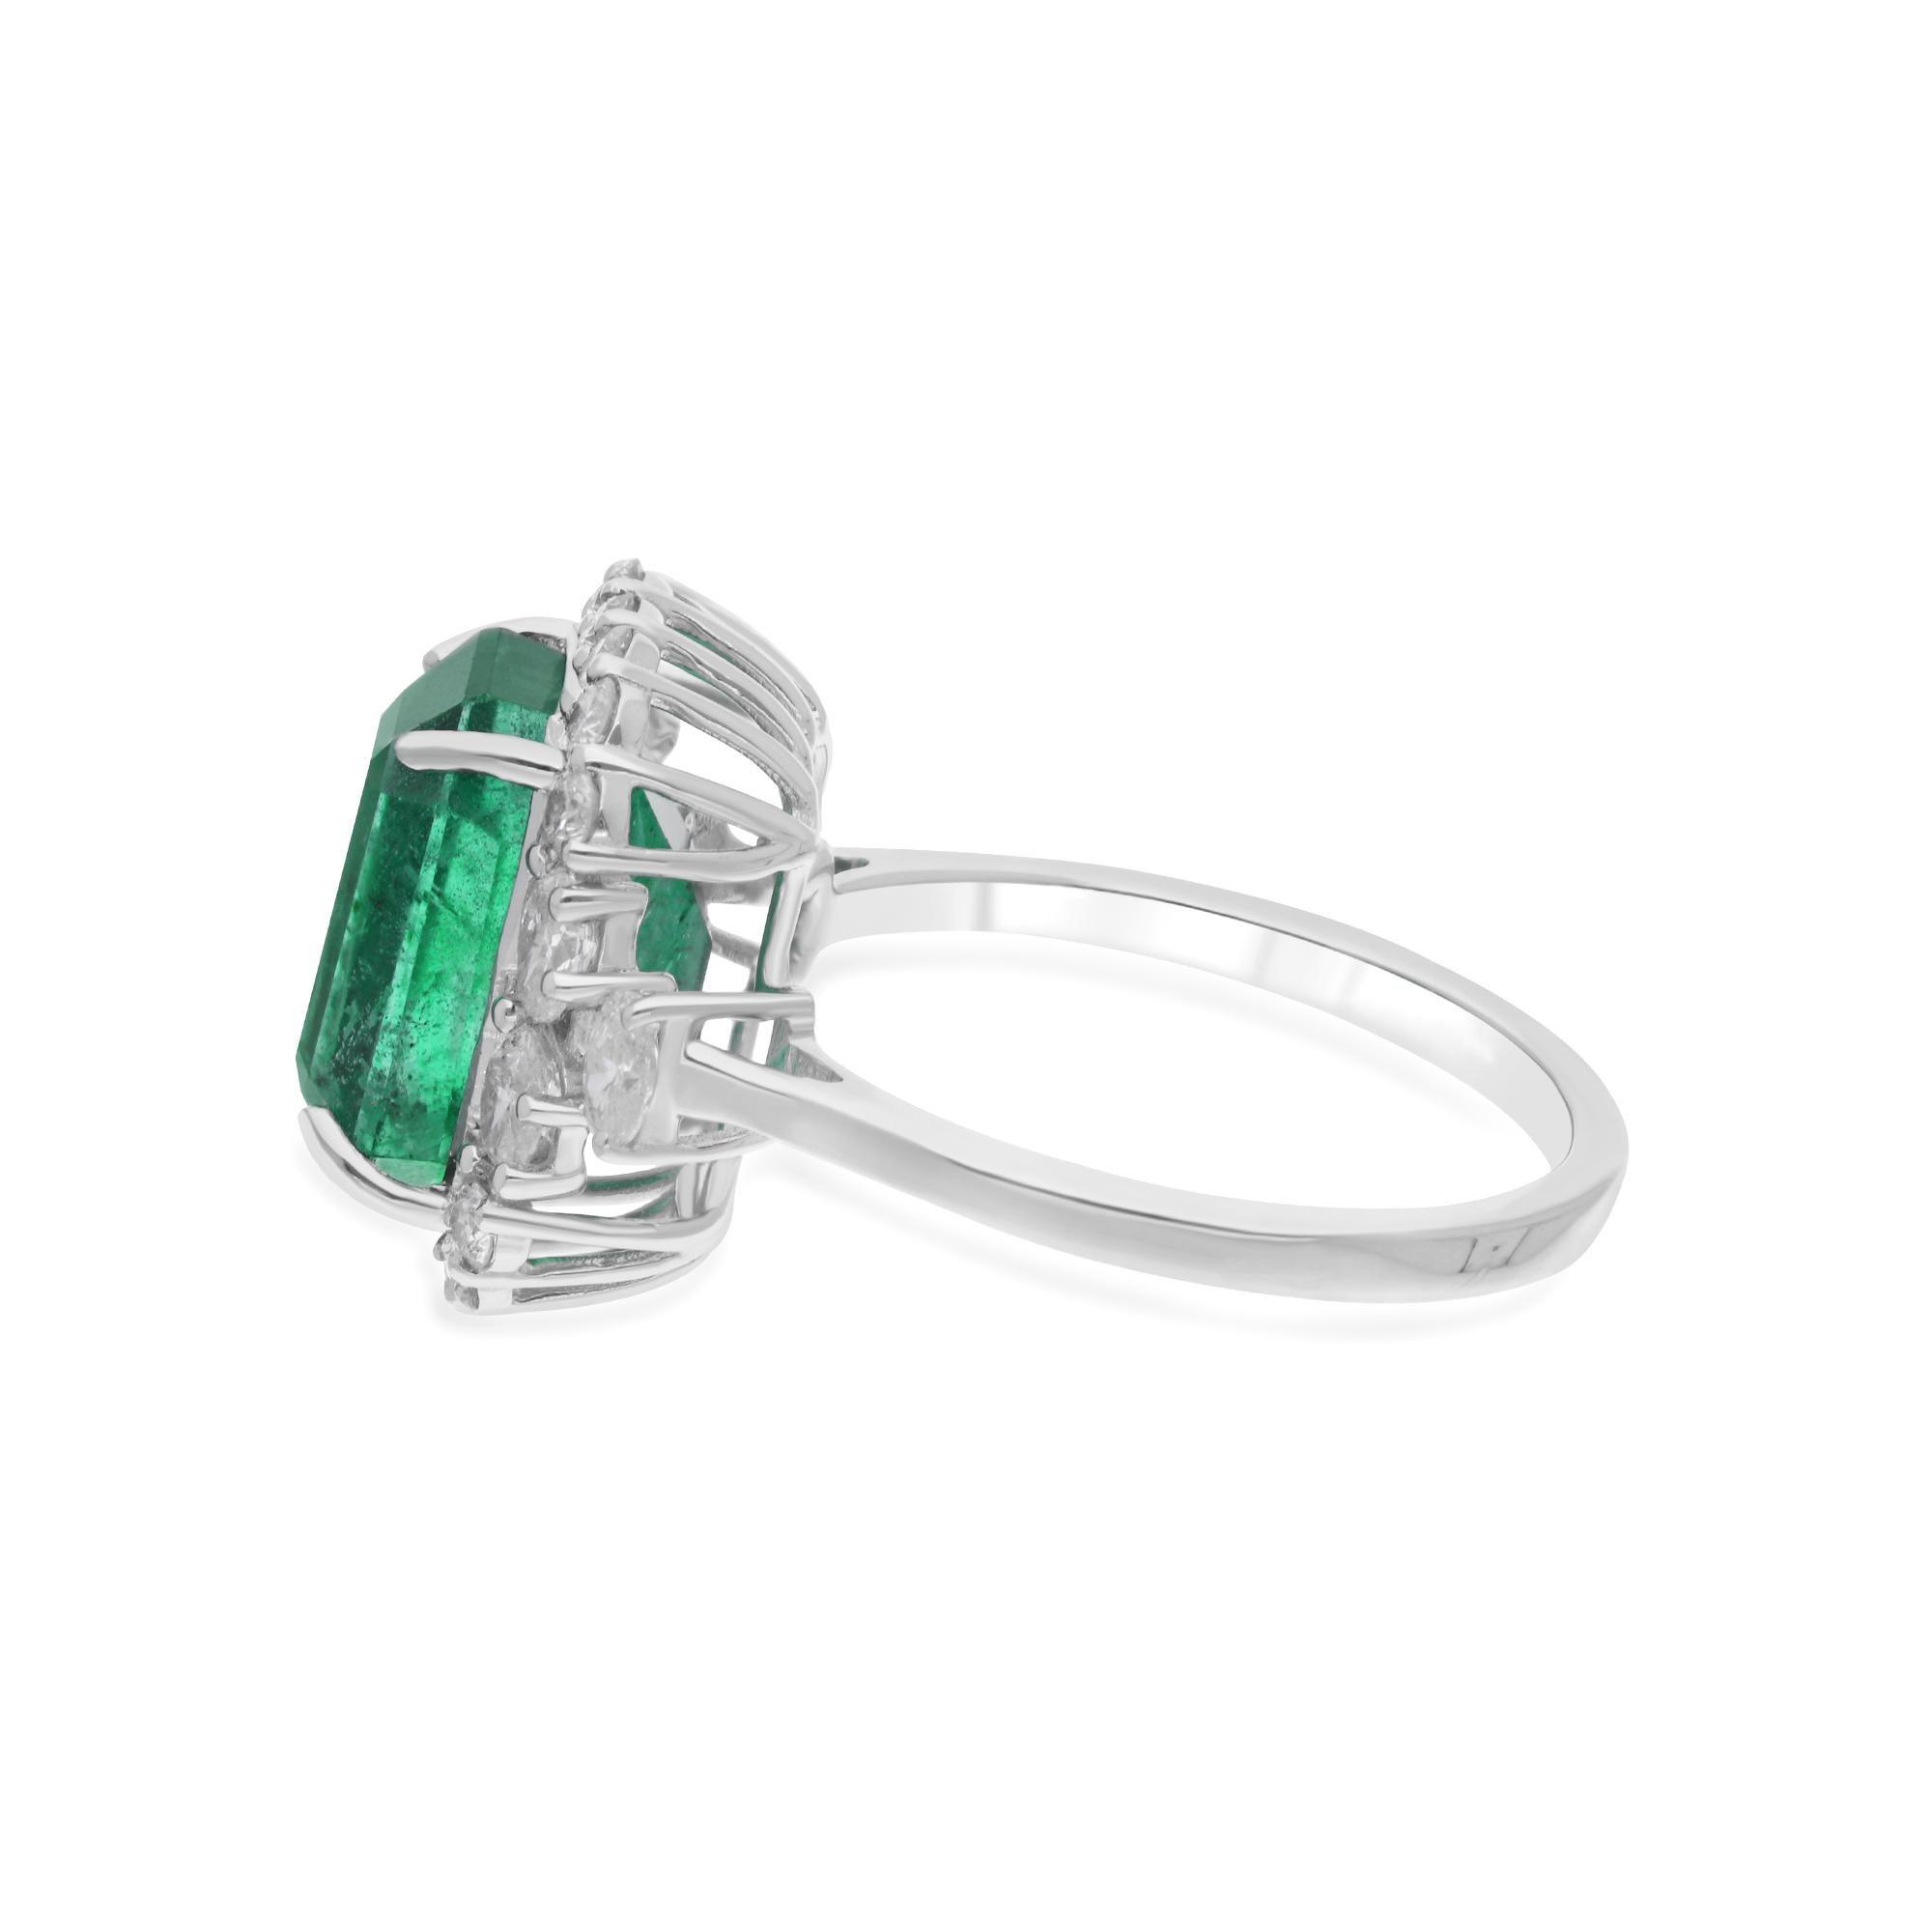 Surrounding the emerald are shimmering diamonds, meticulously set to enhance its beauty and create a mesmerizing display of light. The diamonds add a touch of glamour and sparkle to the design, accentuating the allure of the emerald and elevating